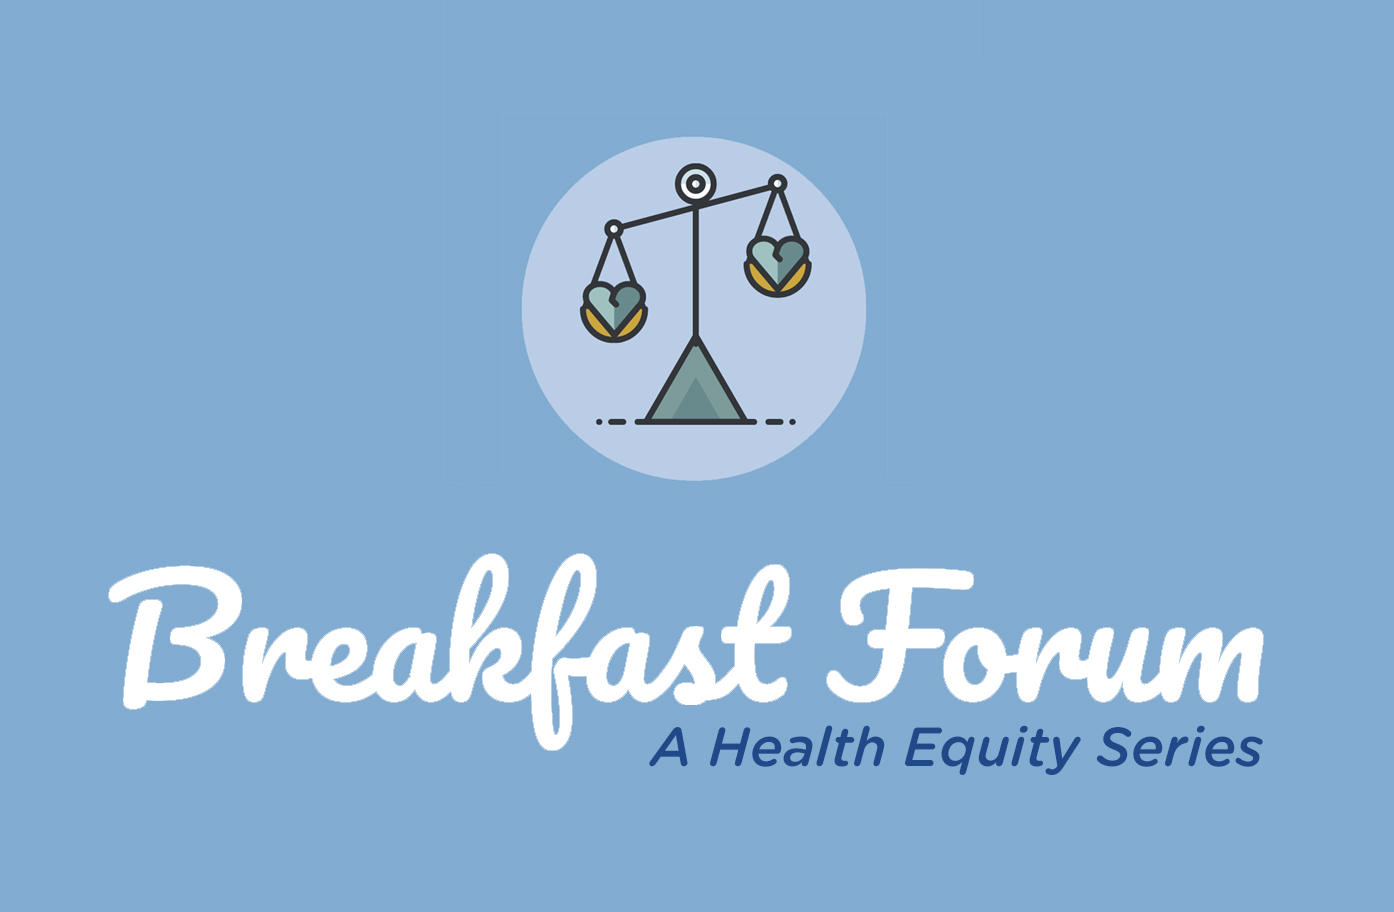 Sharp Equality Alliance Breakfast Forum: A Health Equity Series - 2022 Banner